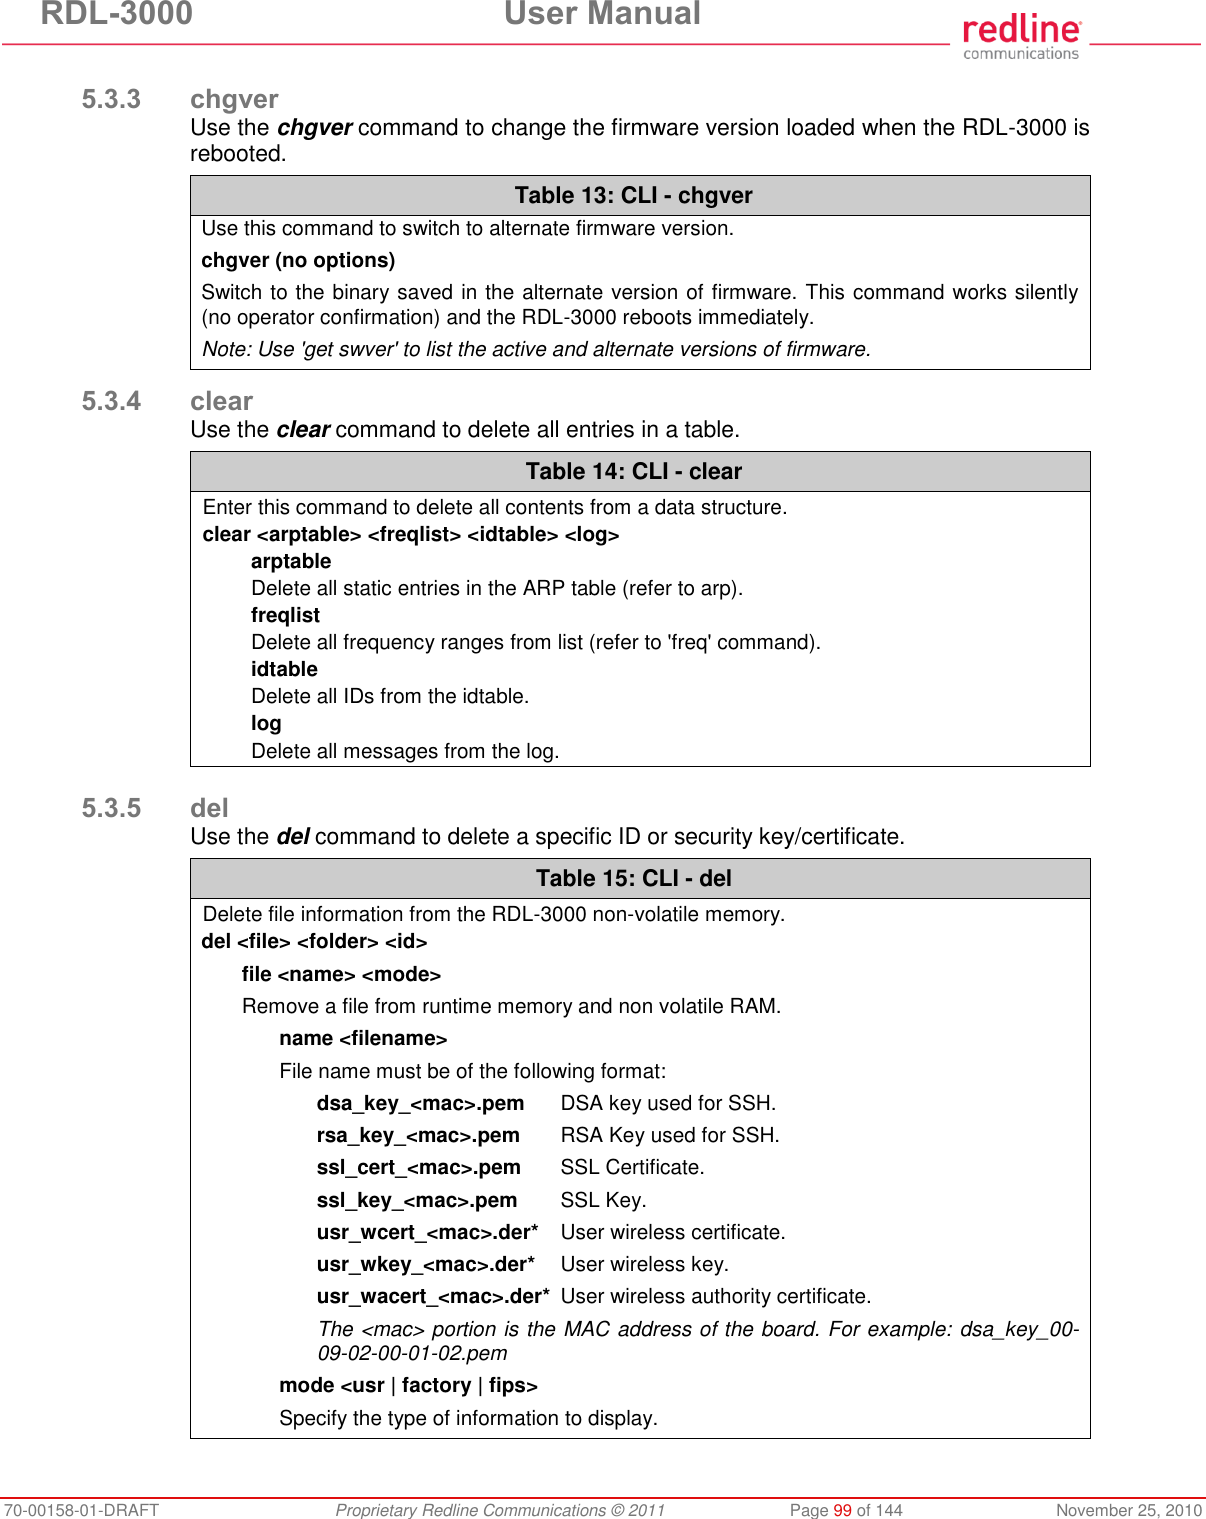 RDL-3000  User Manual 70-00158-01-DRAFT  Proprietary Redline Communications © 2011  Page 99 of 144  November 25, 2010  5.3.3 chgver Use the chgver command to change the firmware version loaded when the RDL-3000 is rebooted. Table 13: CLI - chgver Use this command to switch to alternate firmware version.  chgver (no options) Switch to the binary saved in the alternate version of firmware. This command works silently (no operator confirmation) and the RDL-3000 reboots immediately. Note: Use &apos;get swver&apos; to list the active and alternate versions of firmware.  5.3.4 clear Use the clear command to delete all entries in a table. Table 14: CLI - clear Enter this command to delete all contents from a data structure. clear &lt;arptable&gt; &lt;freqlist&gt; &lt;idtable&gt; &lt;log&gt; arptable Delete all static entries in the ARP table (refer to arp). freqlist Delete all frequency ranges from list (refer to &apos;freq&apos; command). idtable Delete all IDs from the idtable. log Delete all messages from the log.   5.3.5 del Use the del command to delete a specific ID or security key/certificate. Table 15: CLI - del Delete file information from the RDL-3000 non-volatile memory. del &lt;file&gt; &lt;folder&gt; &lt;id&gt; file &lt;name&gt; &lt;mode&gt; Remove a file from runtime memory and non volatile RAM.   name &lt;filename&gt;   File name must be of the following format:  dsa_key_&lt;mac&gt;.pem  DSA key used for SSH.  rsa_key_&lt;mac&gt;.pem  RSA Key used for SSH.  ssl_cert_&lt;mac&gt;.pem  SSL Certificate.  ssl_key_&lt;mac&gt;.pem  SSL Key.  usr_wcert_&lt;mac&gt;.der*  User wireless certificate.  usr_wkey_&lt;mac&gt;.der*  User wireless key.  usr_wacert_&lt;mac&gt;.der*  User wireless authority certificate.  The &lt;mac&gt; portion is the MAC address of the board. For example: dsa_key_00-09-02-00-01-02.pem mode &lt;usr | factory | fips&gt; Specify the type of information to display. 